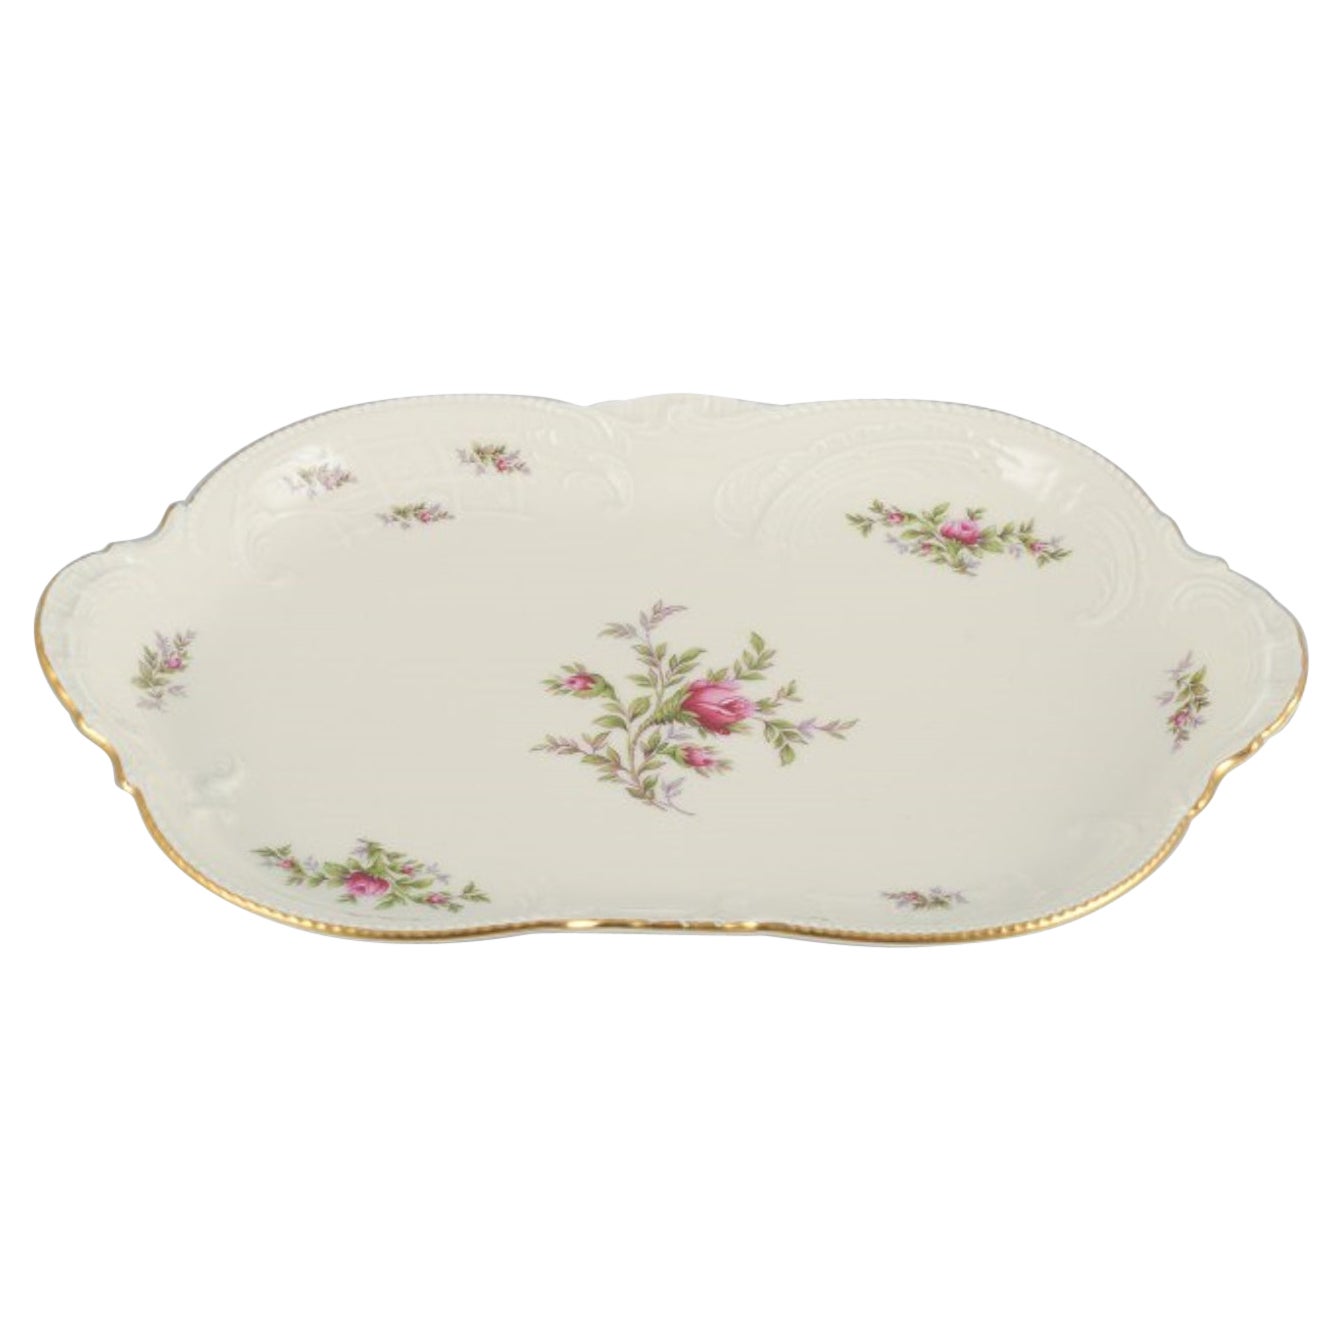 Rosenthal, Germany, "Sanssouci", Cream-Coloured Serving Dish with Flowers